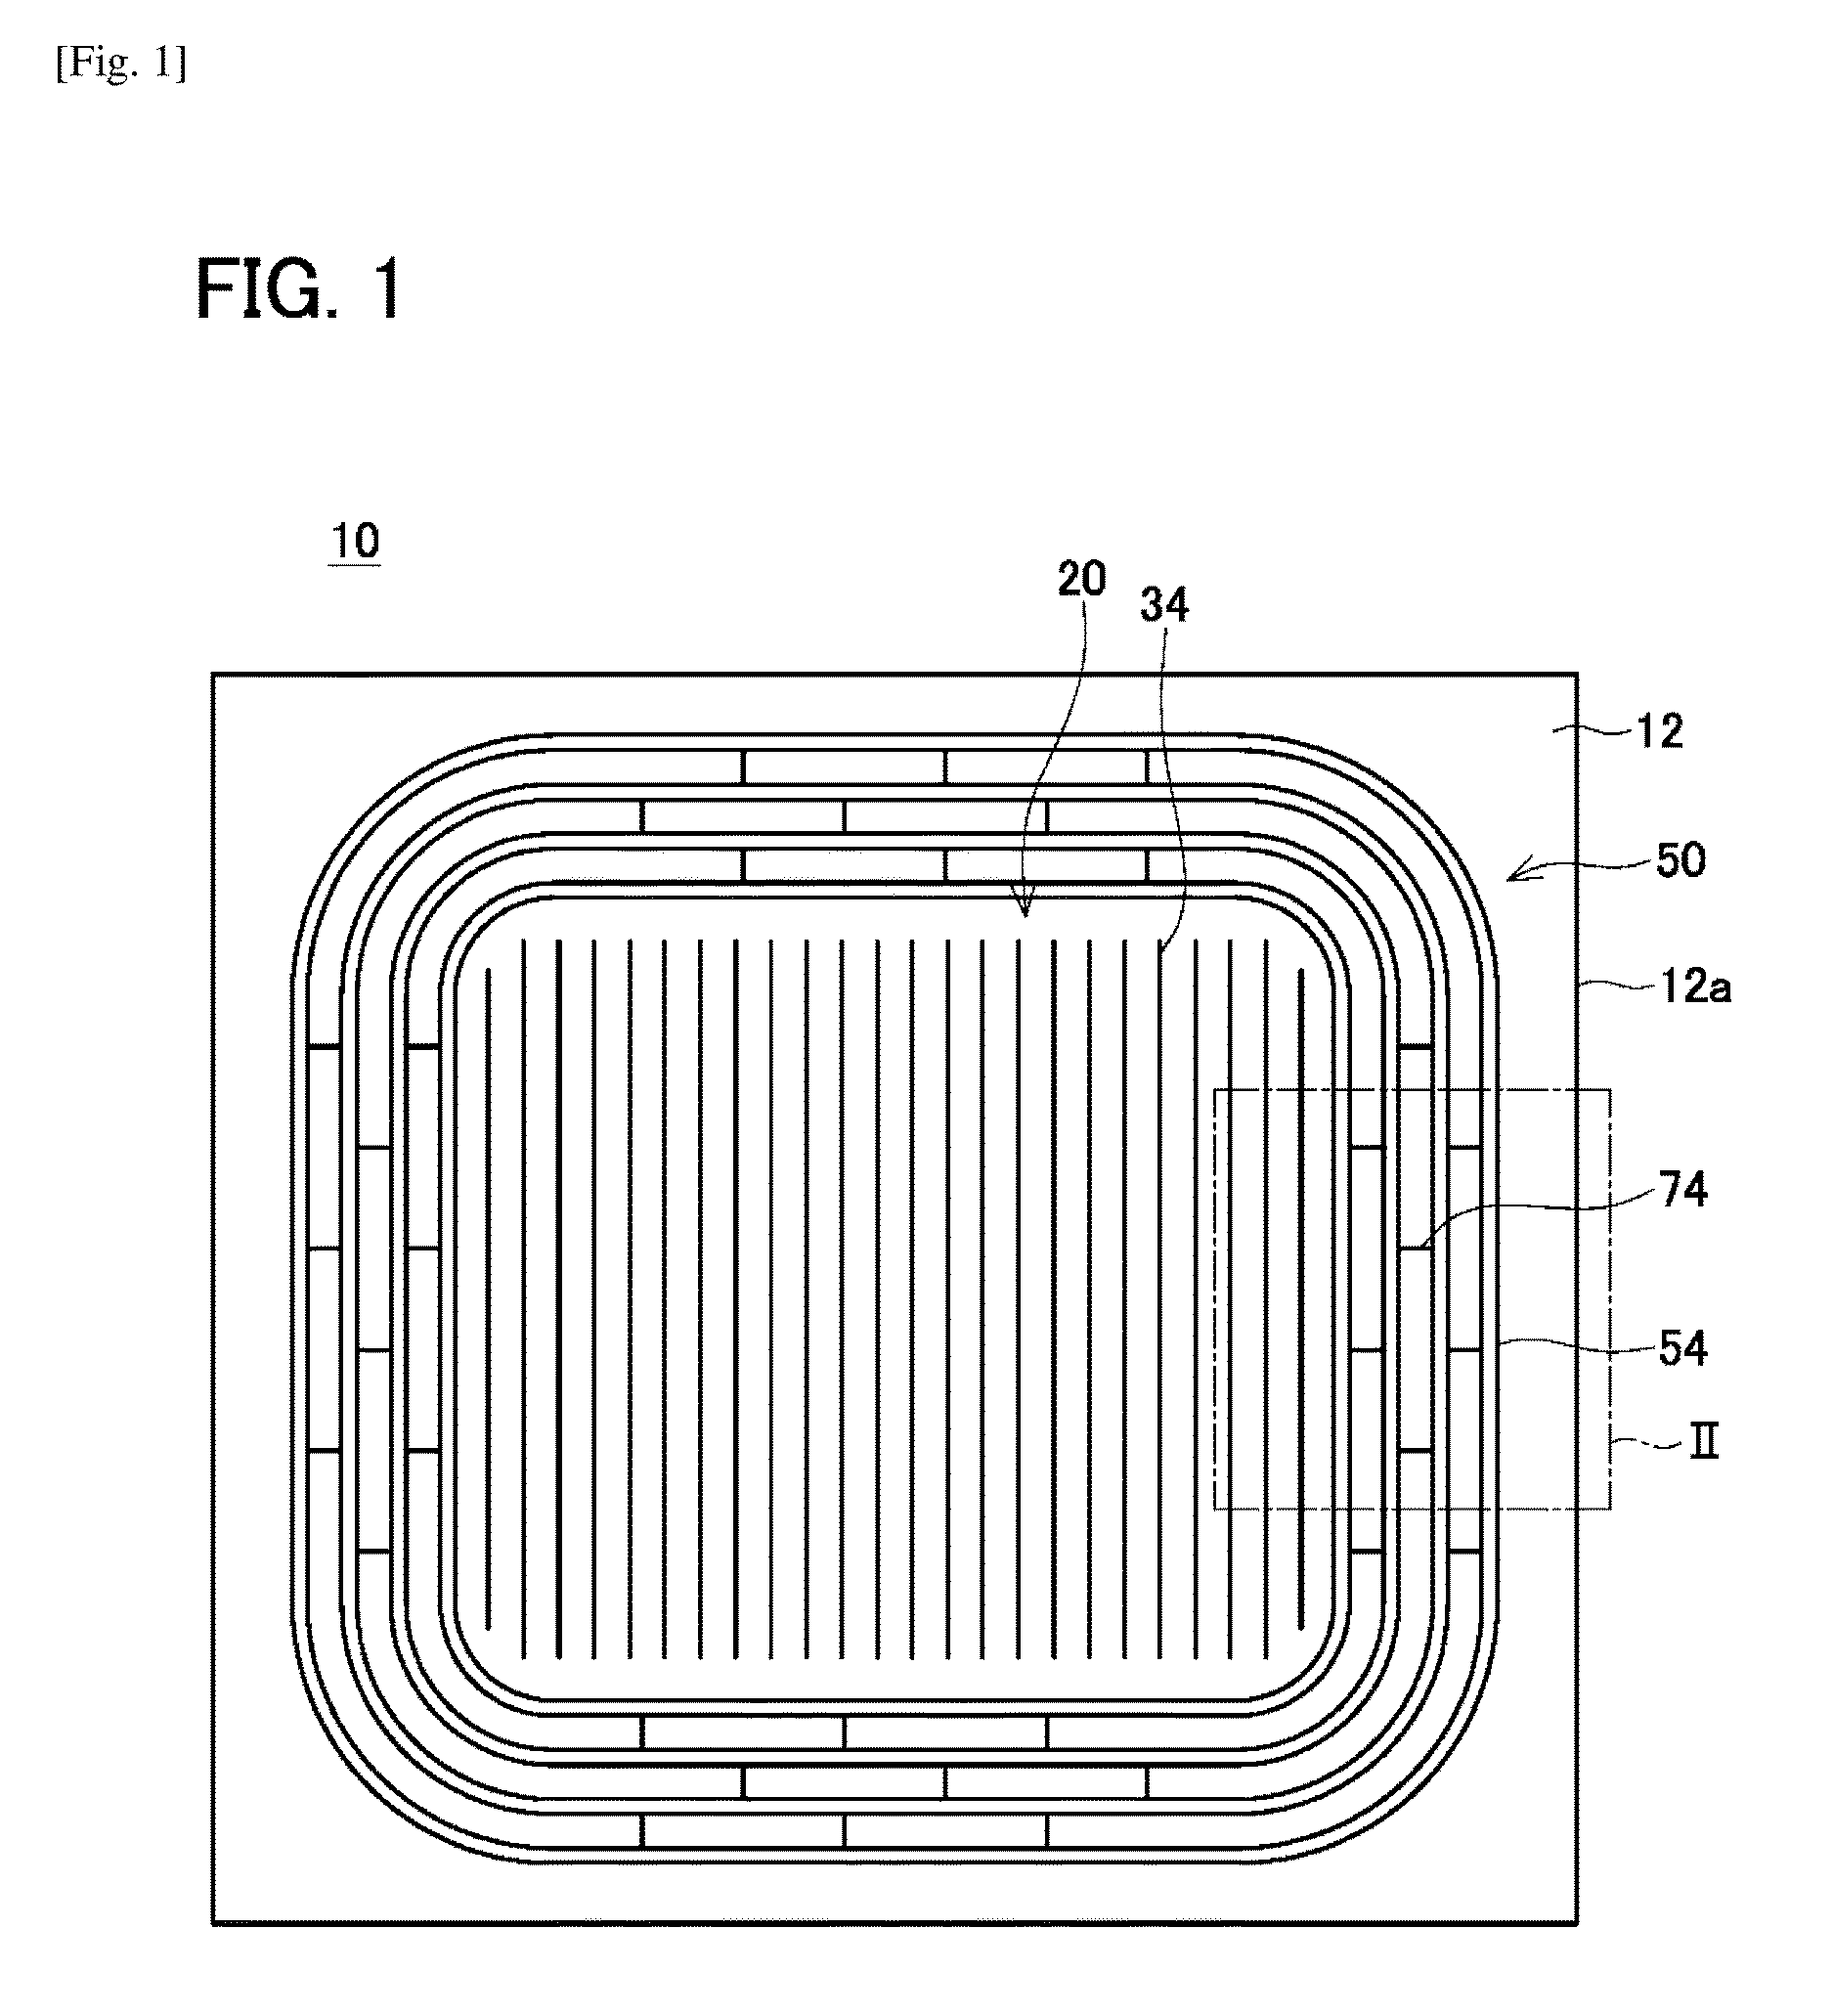 Insulated gate type semiconductor device